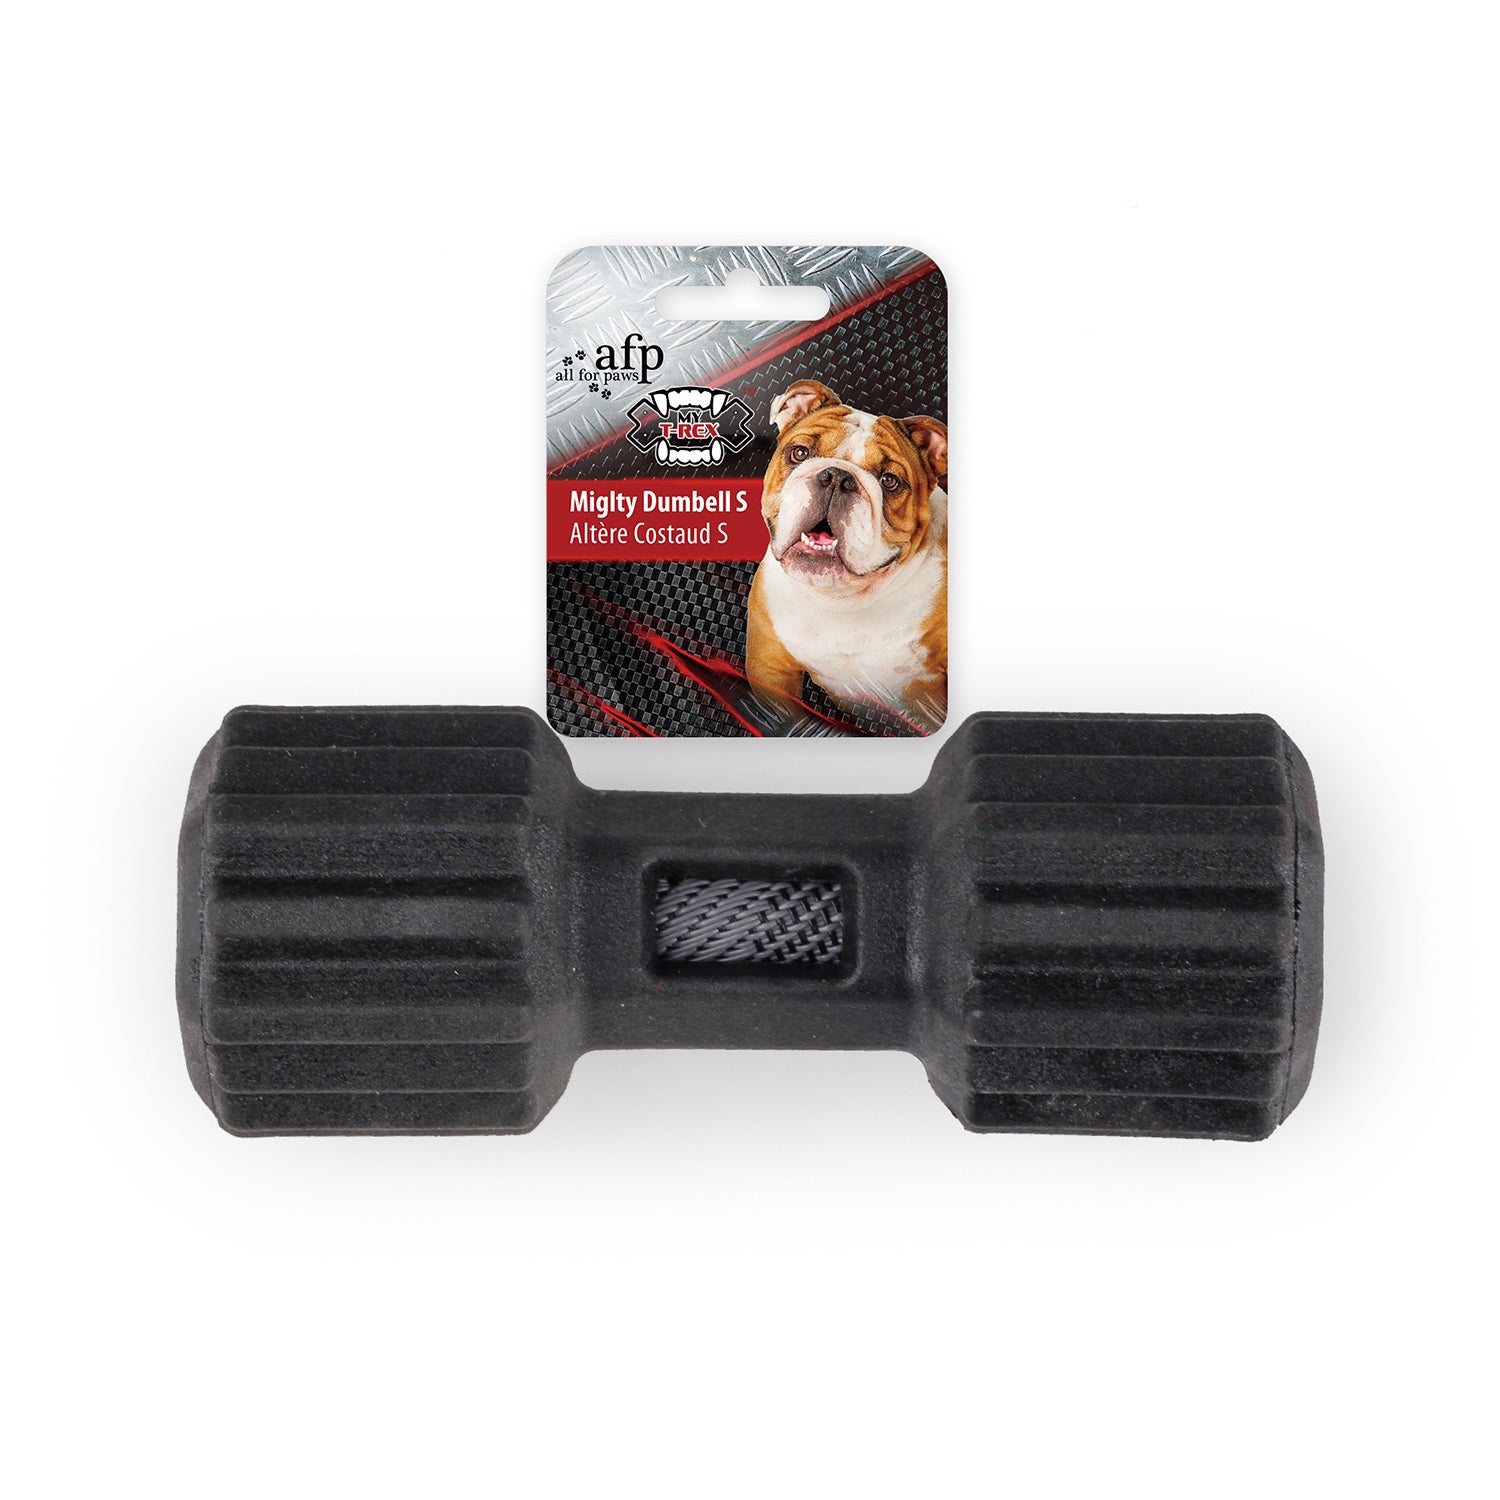 ALL FOR PAWS Dog Chew Toy,Dumbell Puppy Teething Chew Toys,Interactive Dog Toys,Dog Toys for Small Dogs and Medium Dogs